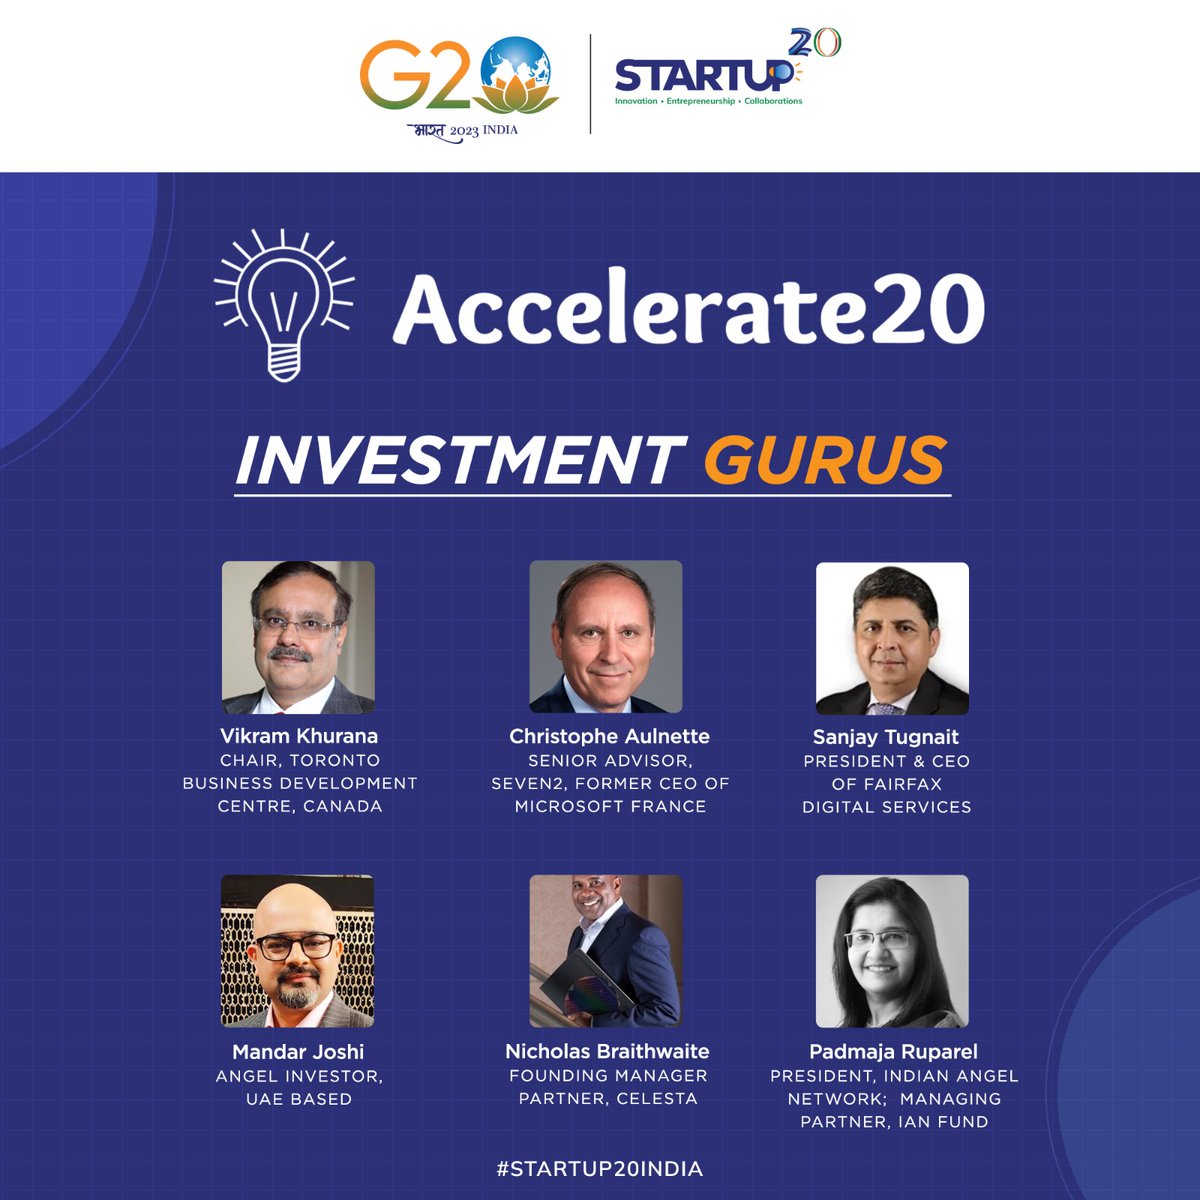 #Startup20 aims to actively address crucial subjects for deliberation and develop practical suggestions pertaining to each focal domain.